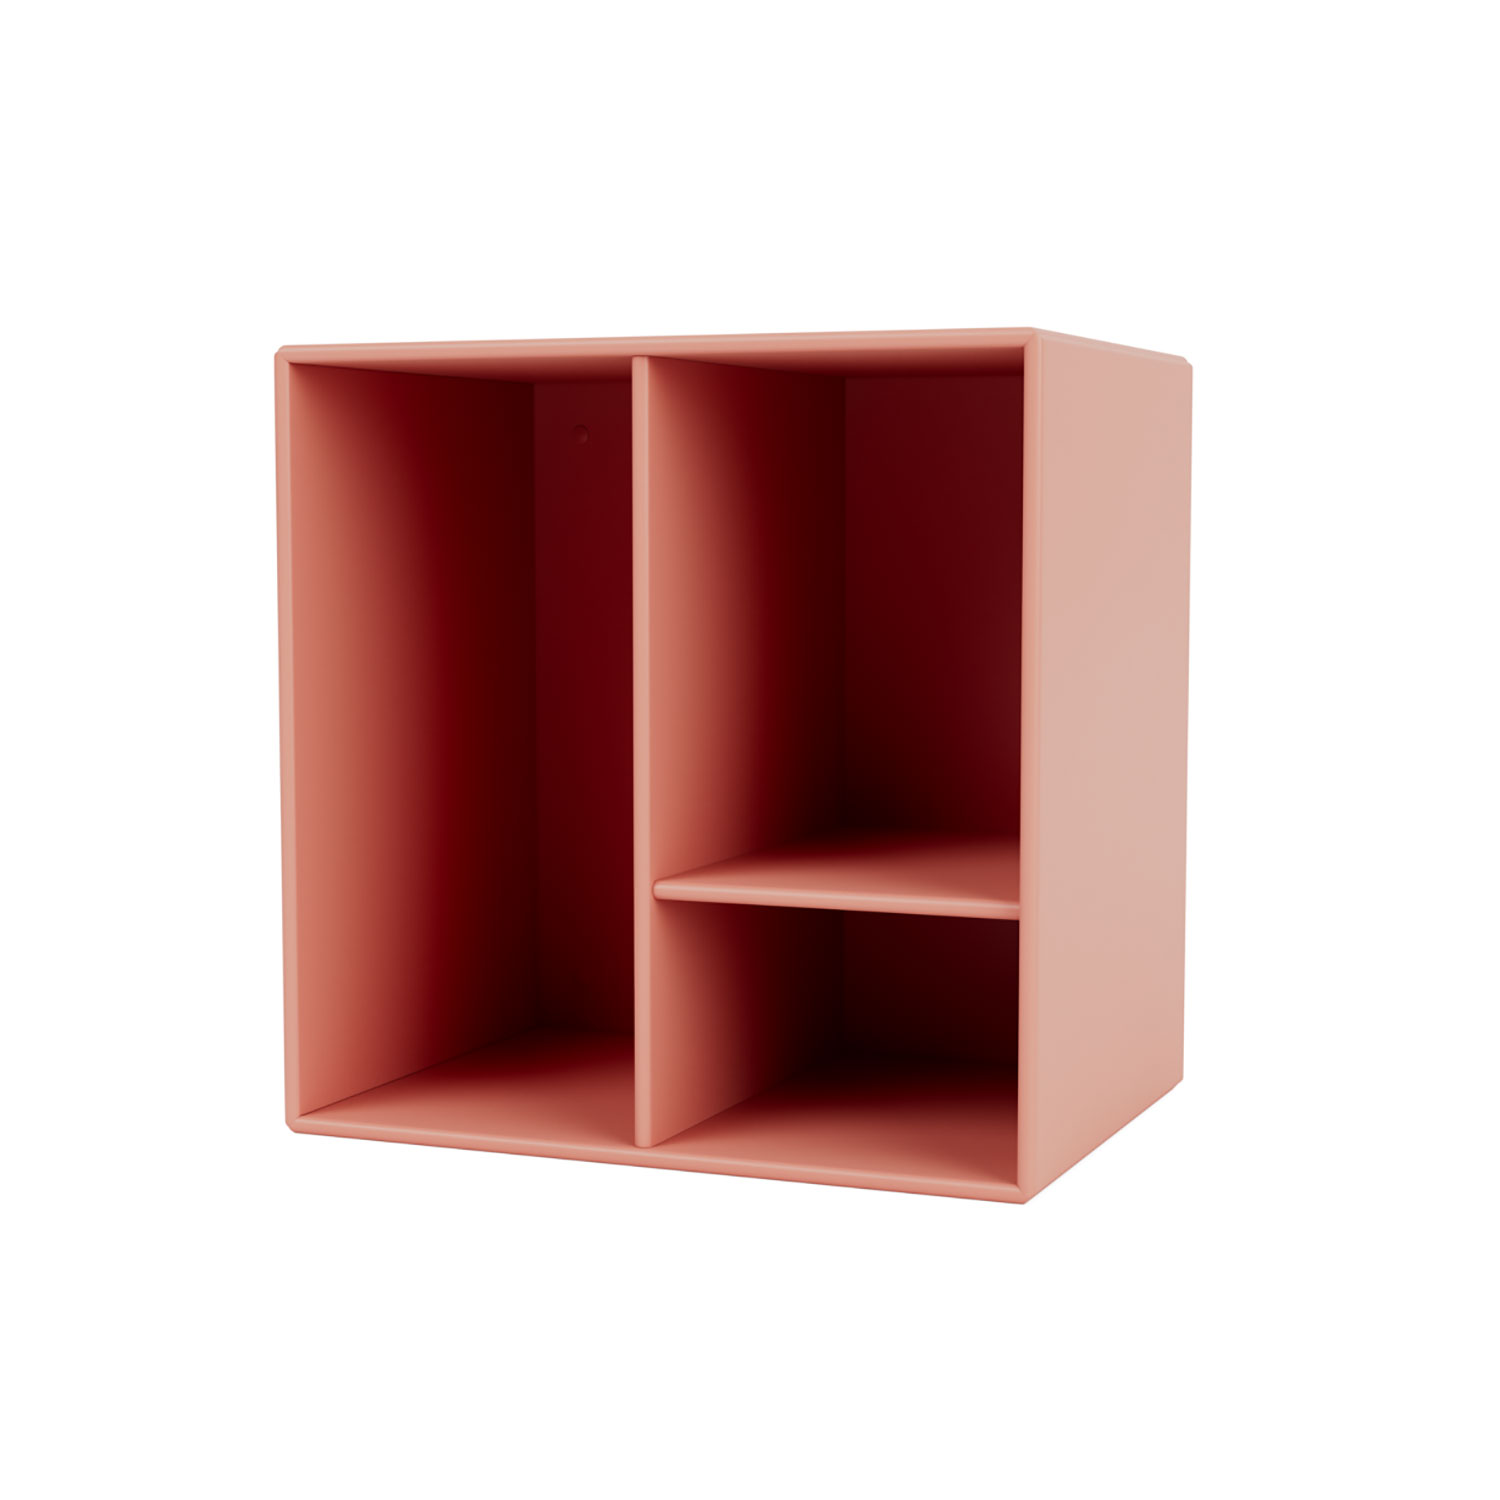 Mini 1002 with shelves, 5 colors